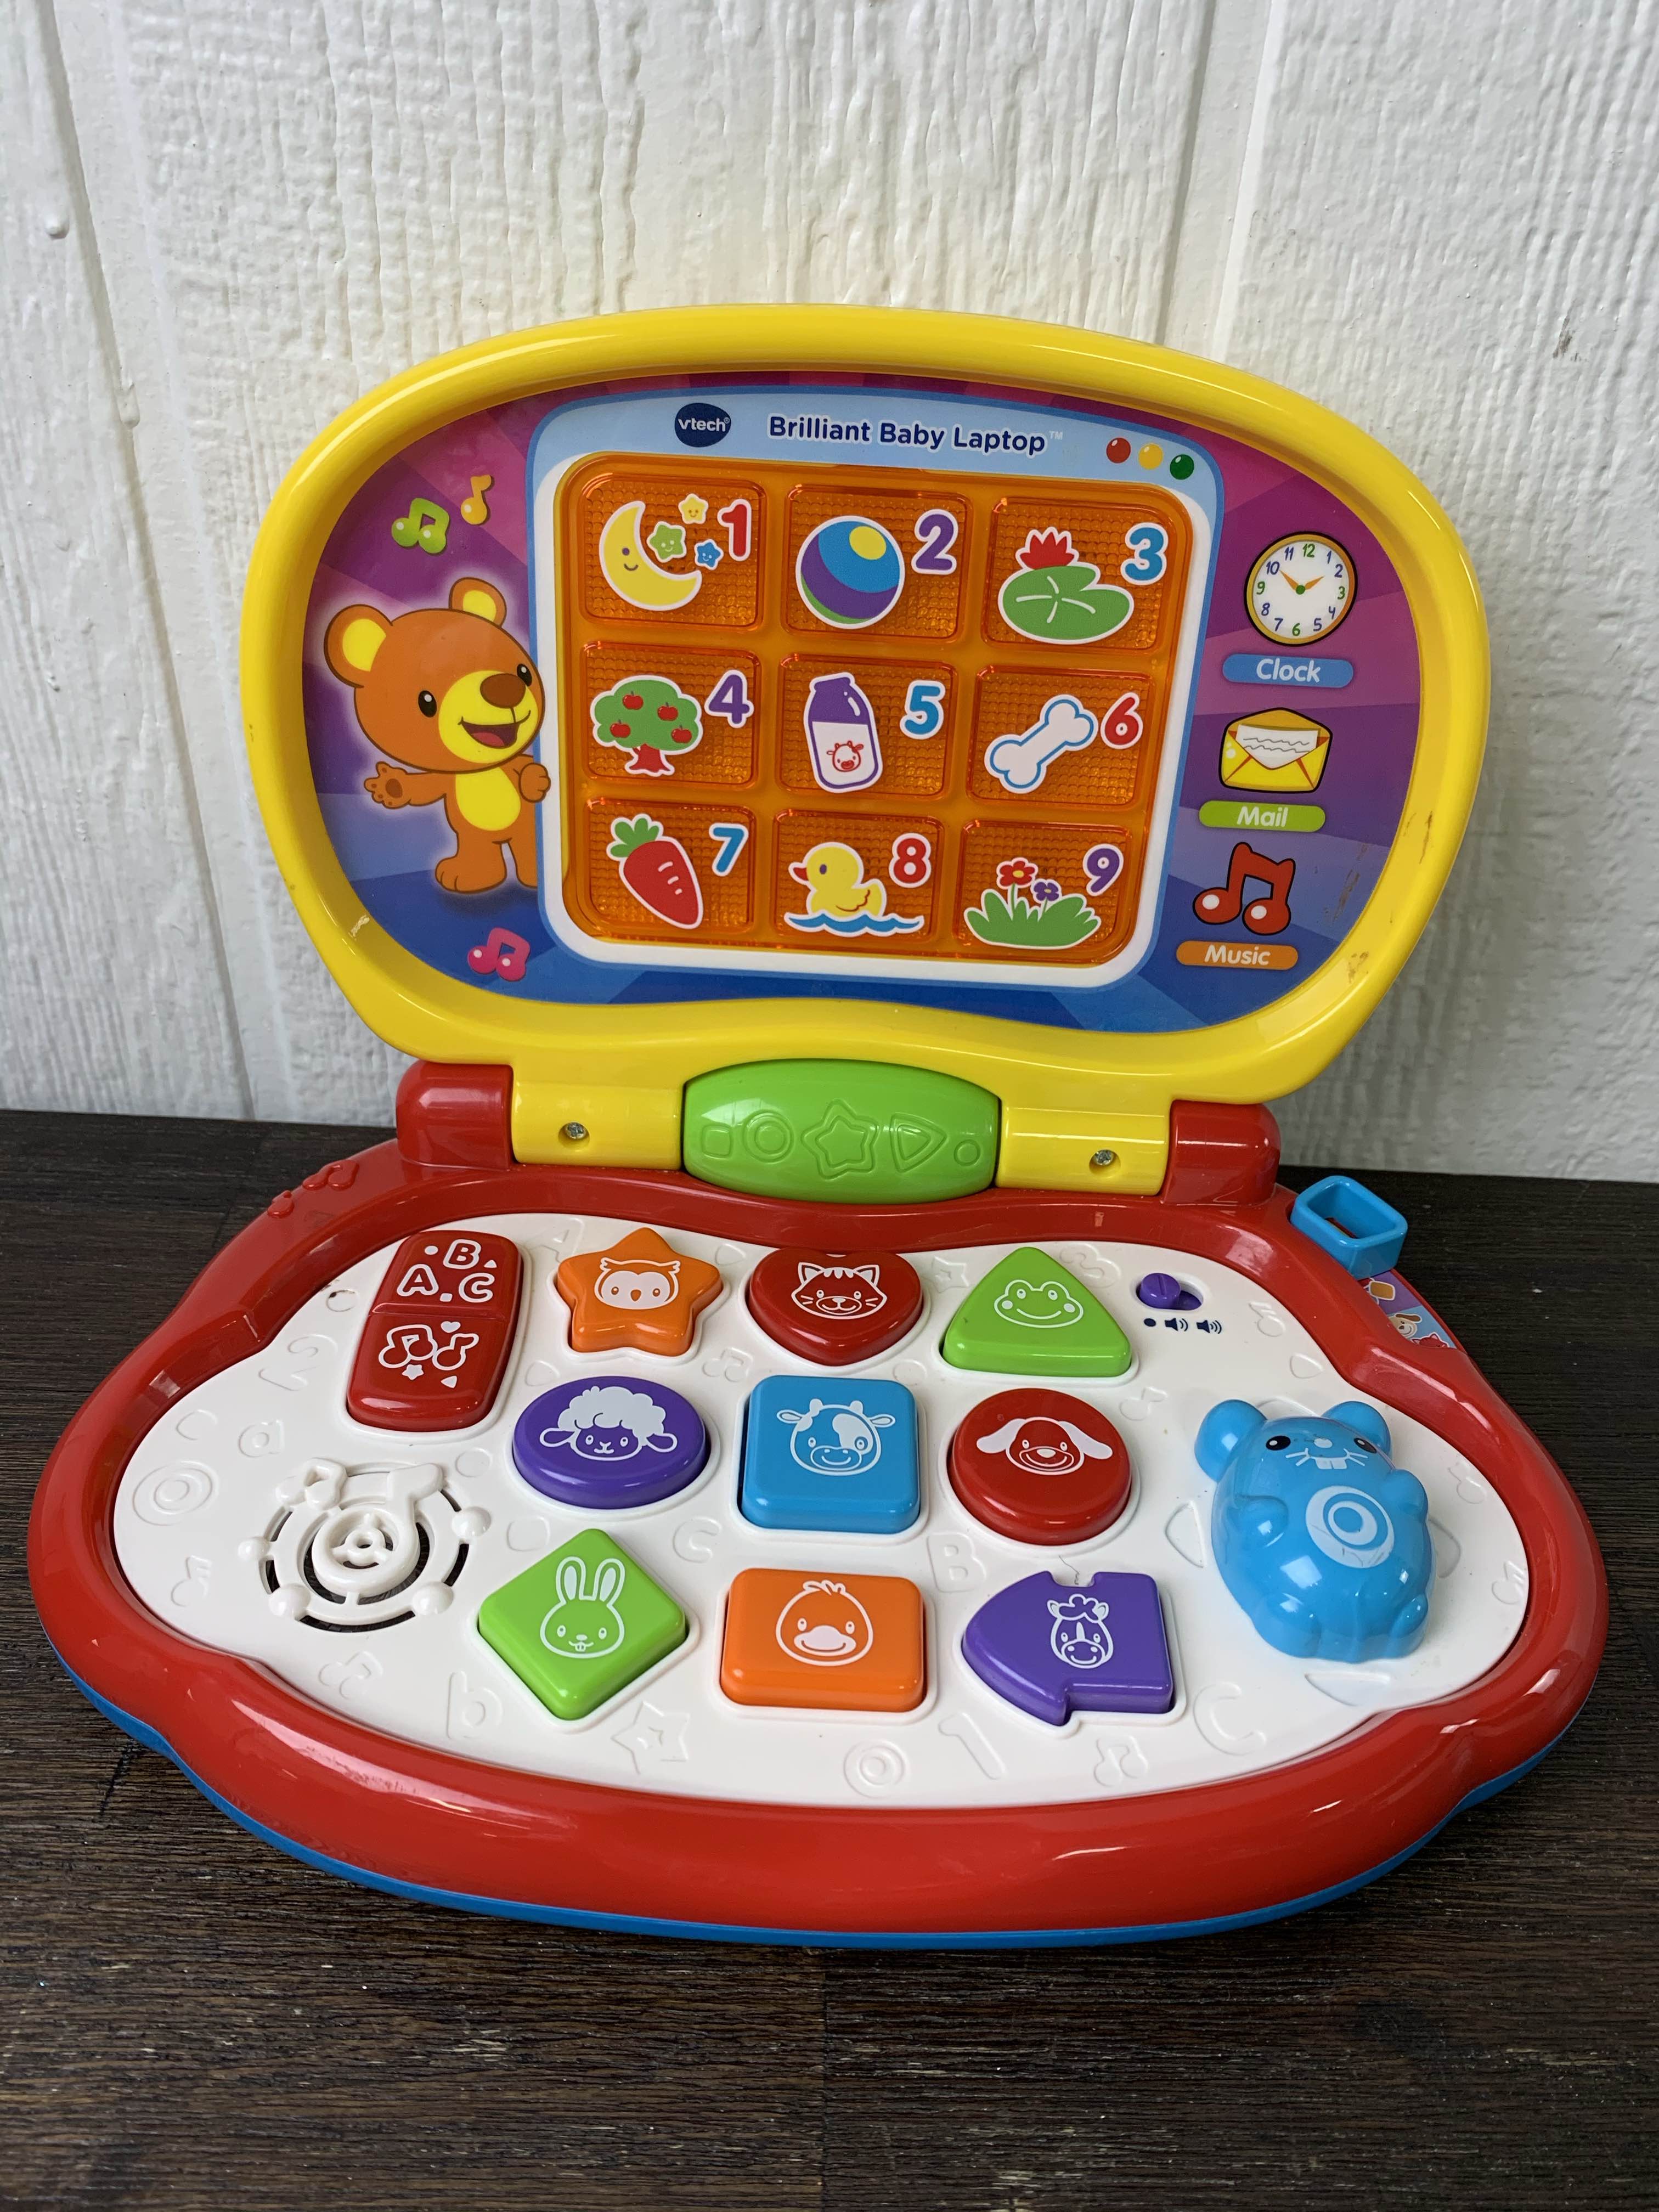 Vtech Brilliant Baby Laptop Great Learning Device 